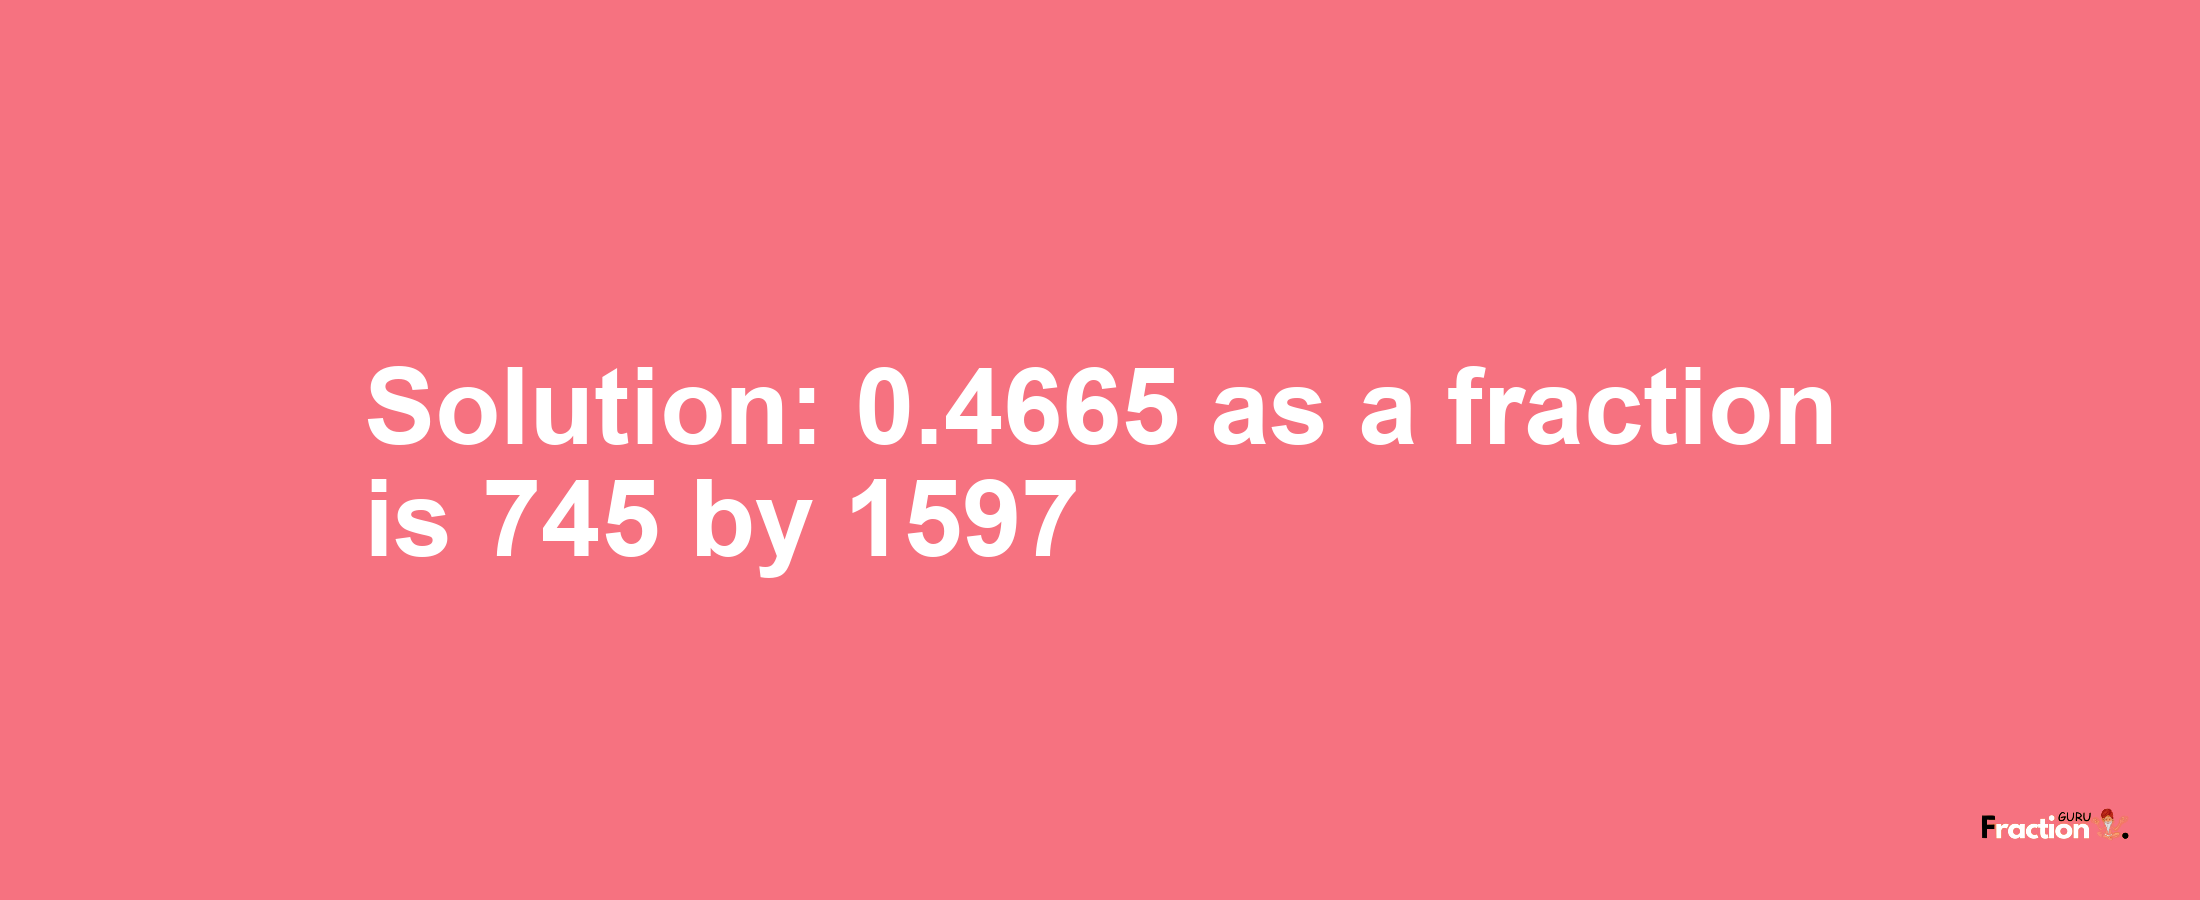 Solution:0.4665 as a fraction is 745/1597